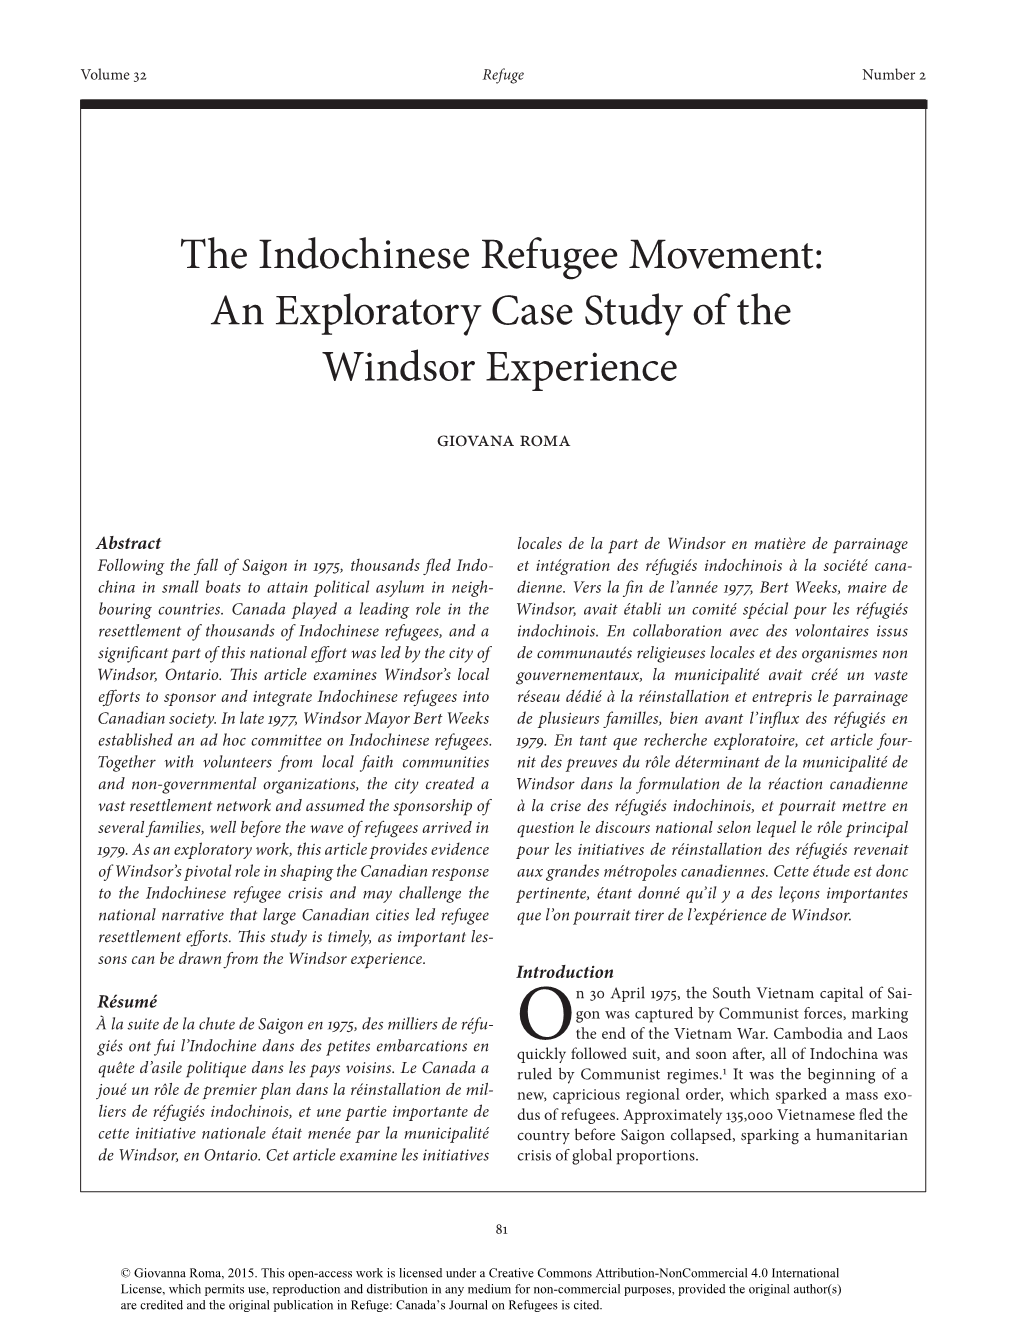 The Indochinese Refugee Movement: an Exploratory Case Study of the Windsor Experience